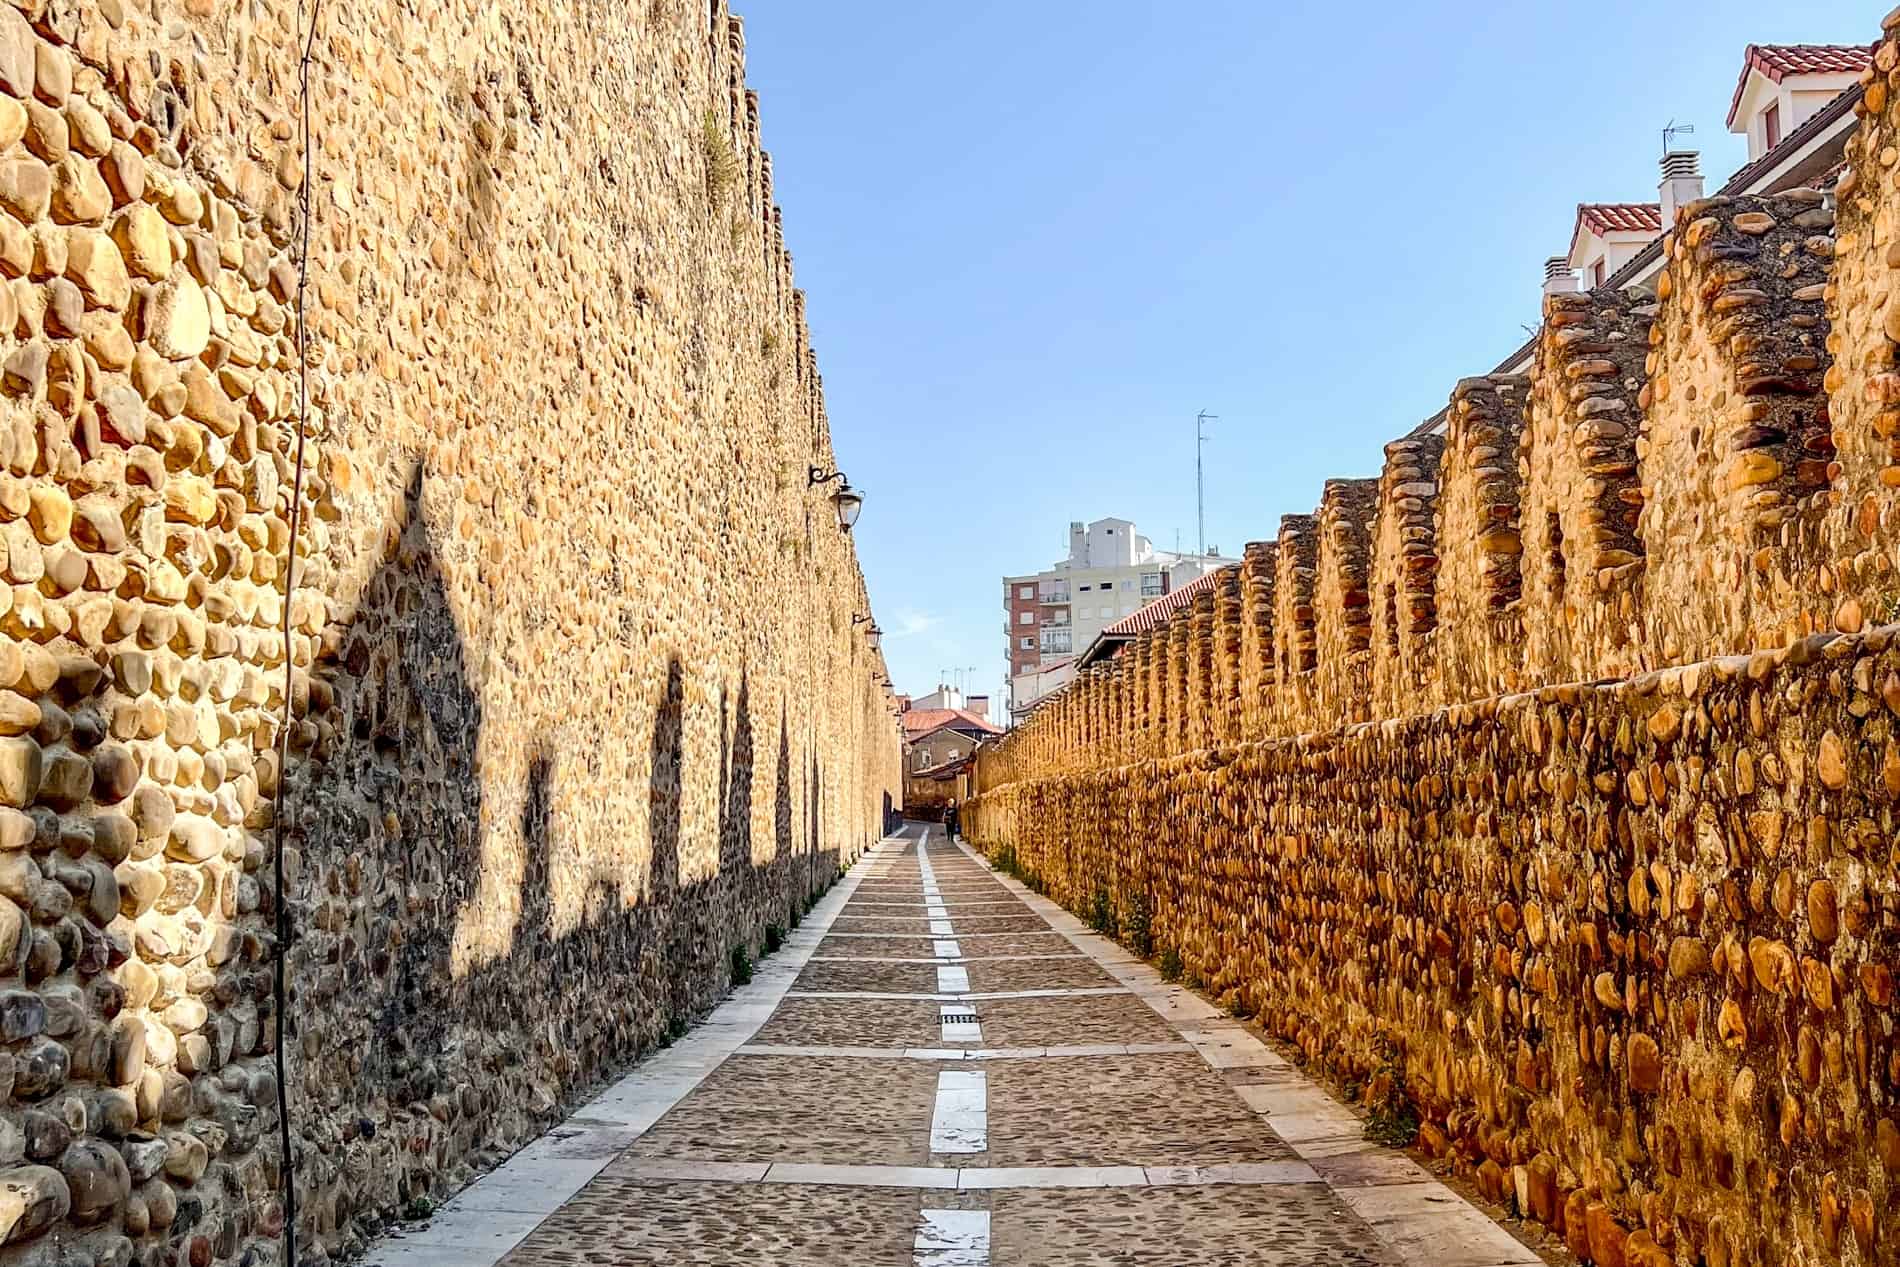 A cobblestone pathway lined by stone walls on either side - the Medieval Fence in León.